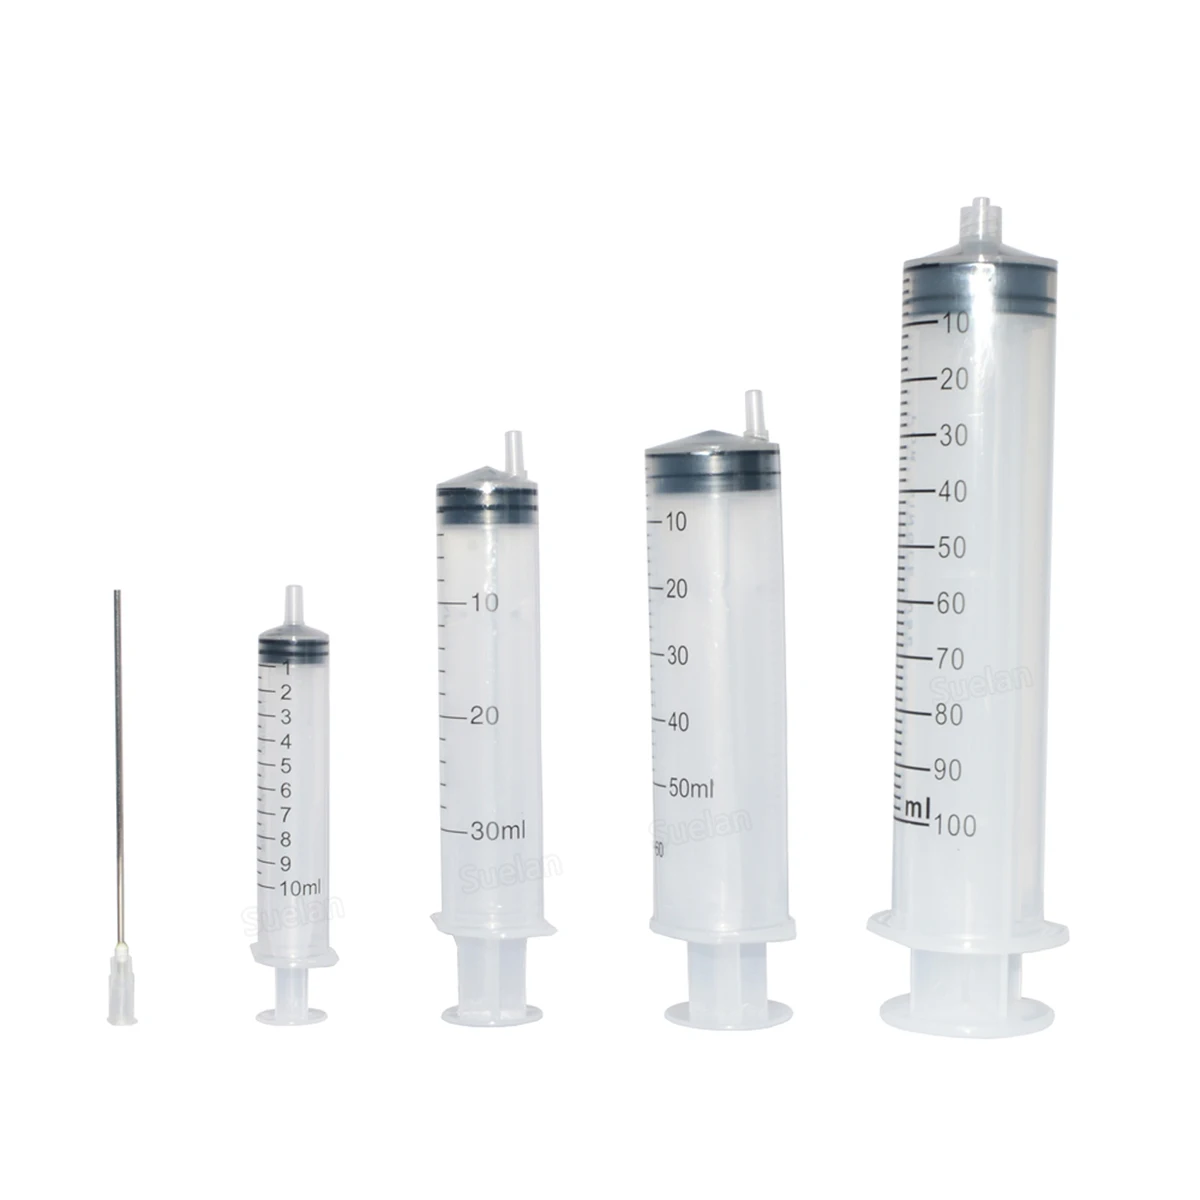 

Ink Syringe with Blunt needle 10ml 30ml Refill Ink Tool for Refilling Ink CISS Ink Cartridges